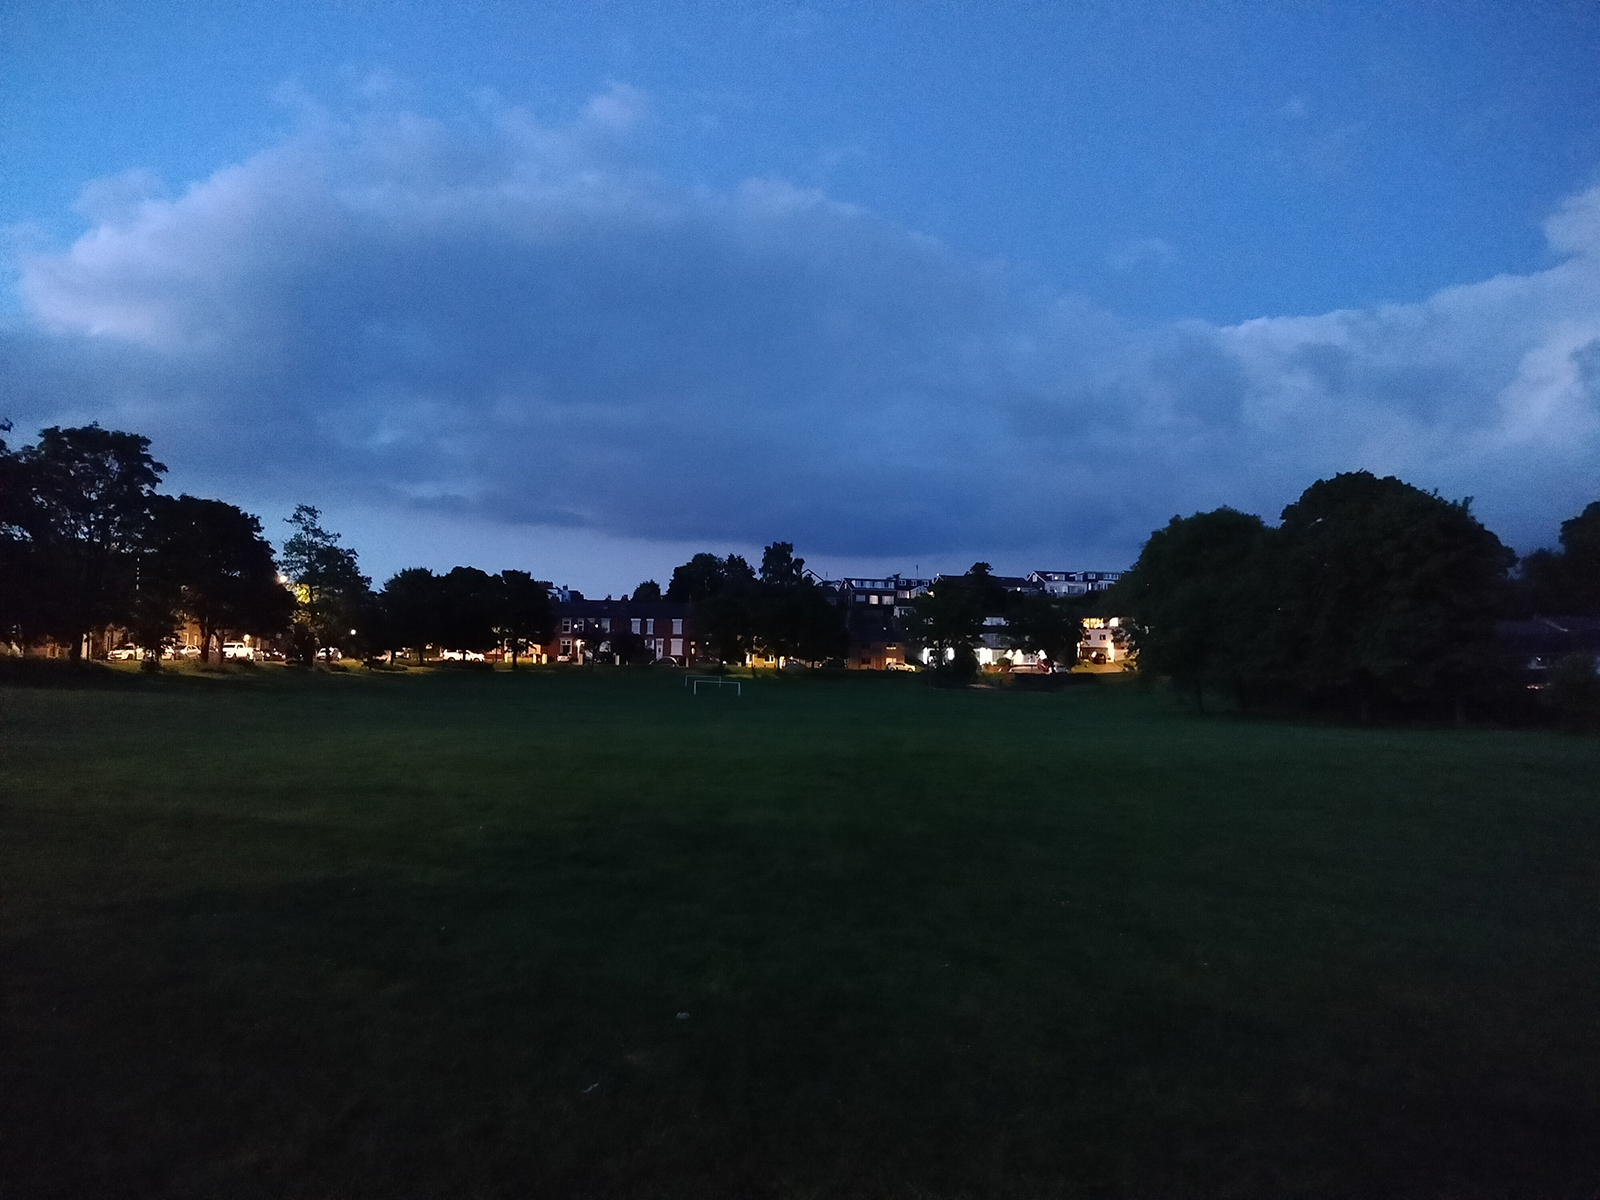 Realme 9 camera sample showing an open field at night